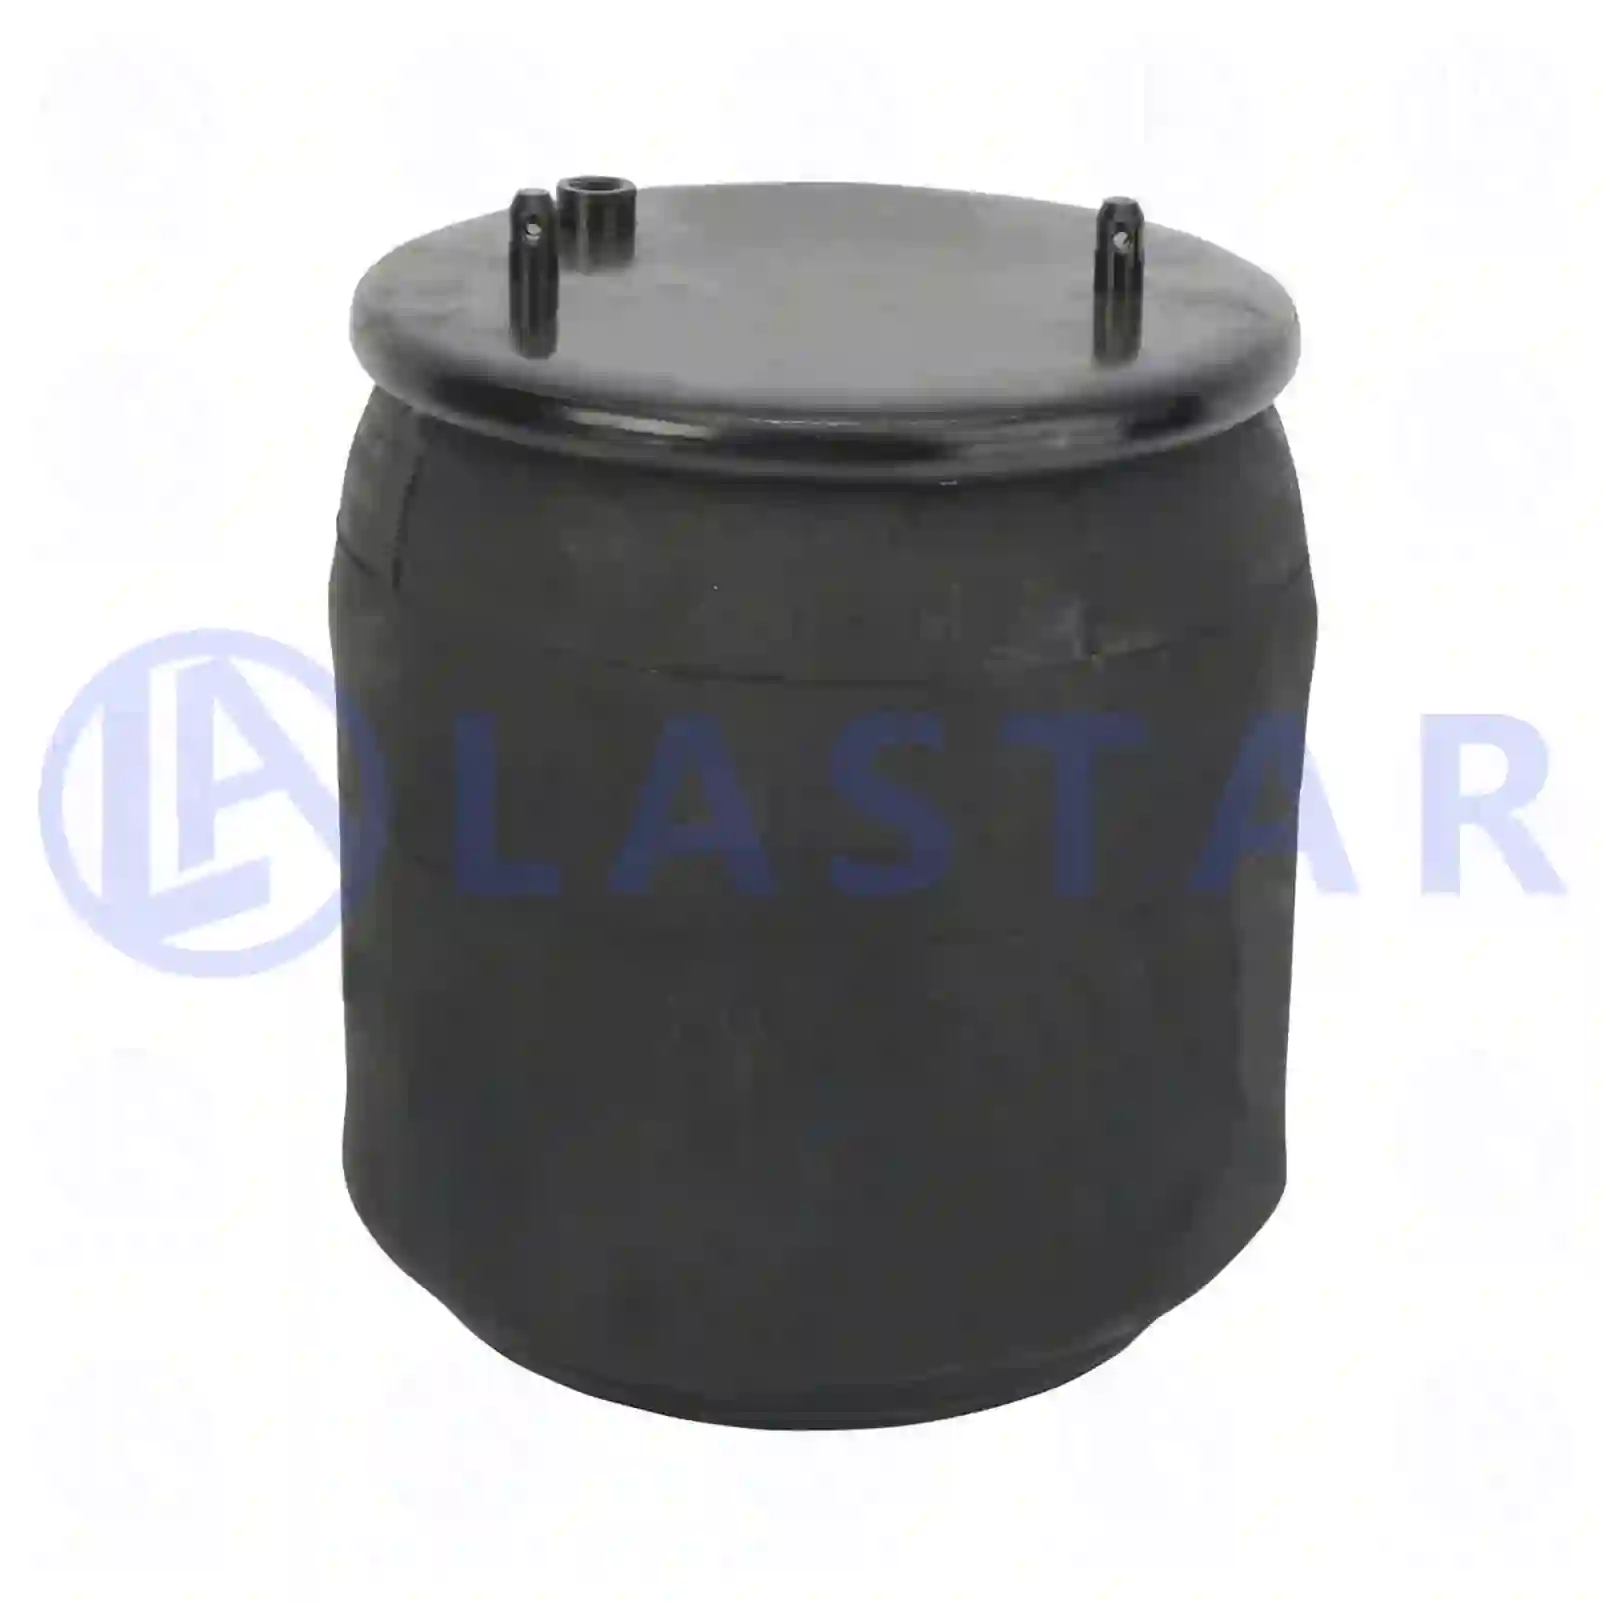 Air spring, with steel piston, 77727093, 1434506, 470923, 488264, ||  77727093 Lastar Spare Part | Truck Spare Parts, Auotomotive Spare Parts Air spring, with steel piston, 77727093, 1434506, 470923, 488264, ||  77727093 Lastar Spare Part | Truck Spare Parts, Auotomotive Spare Parts